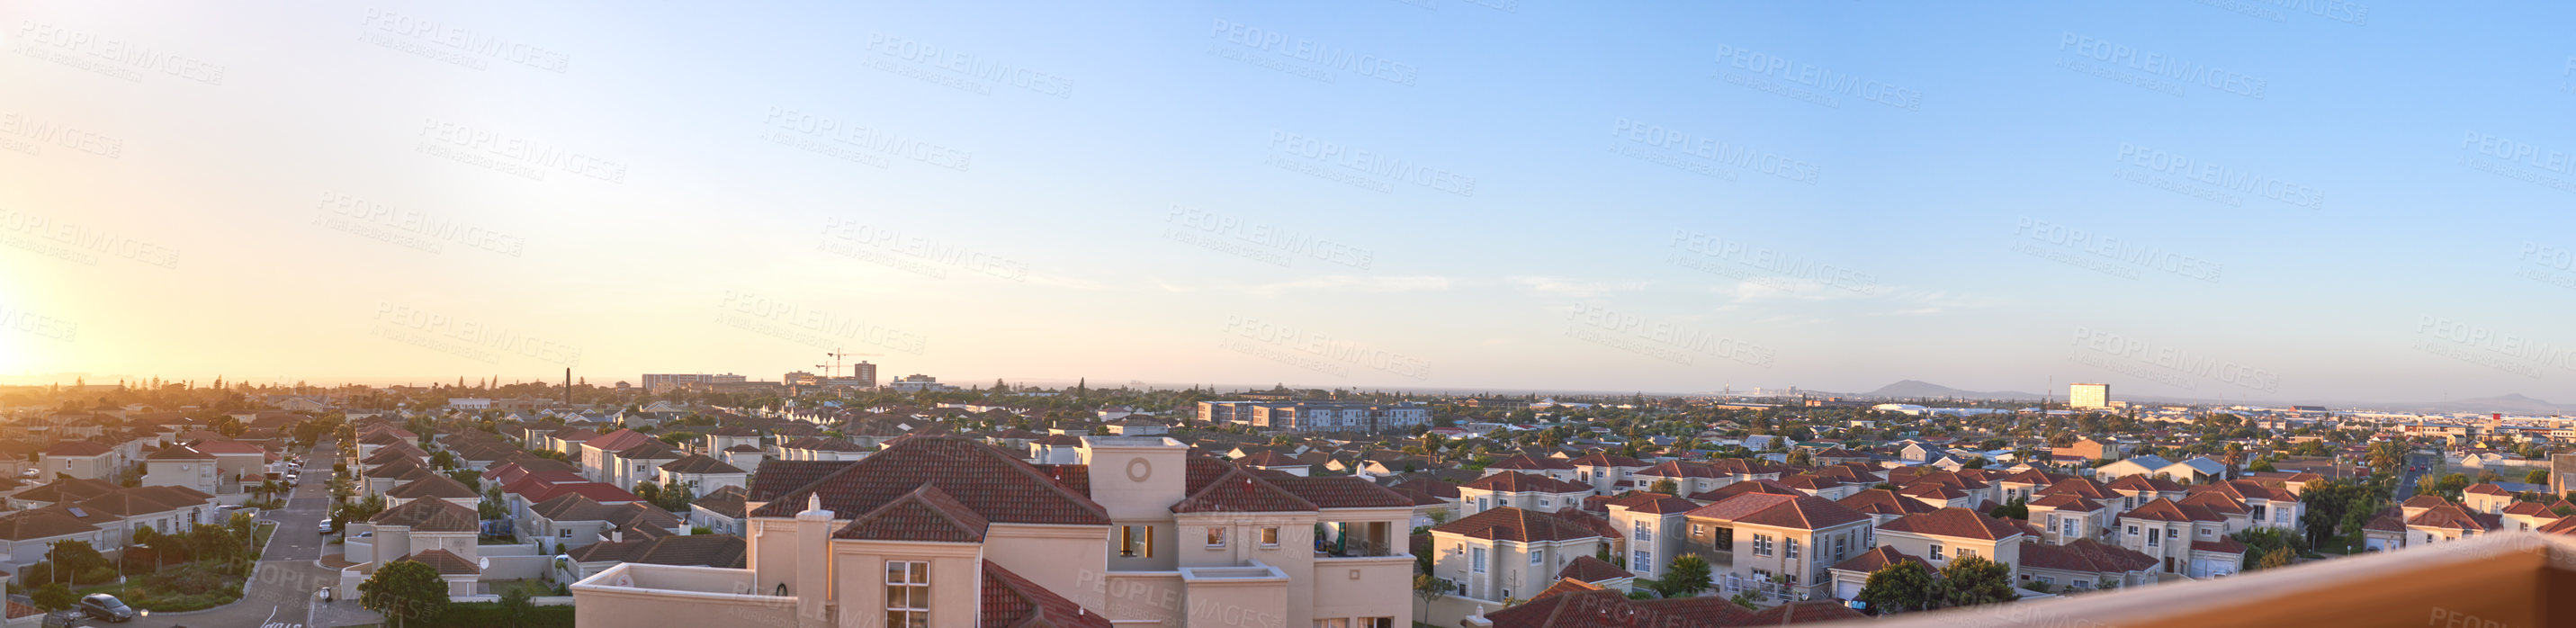 Buy stock photo Shot of a suburb in the city